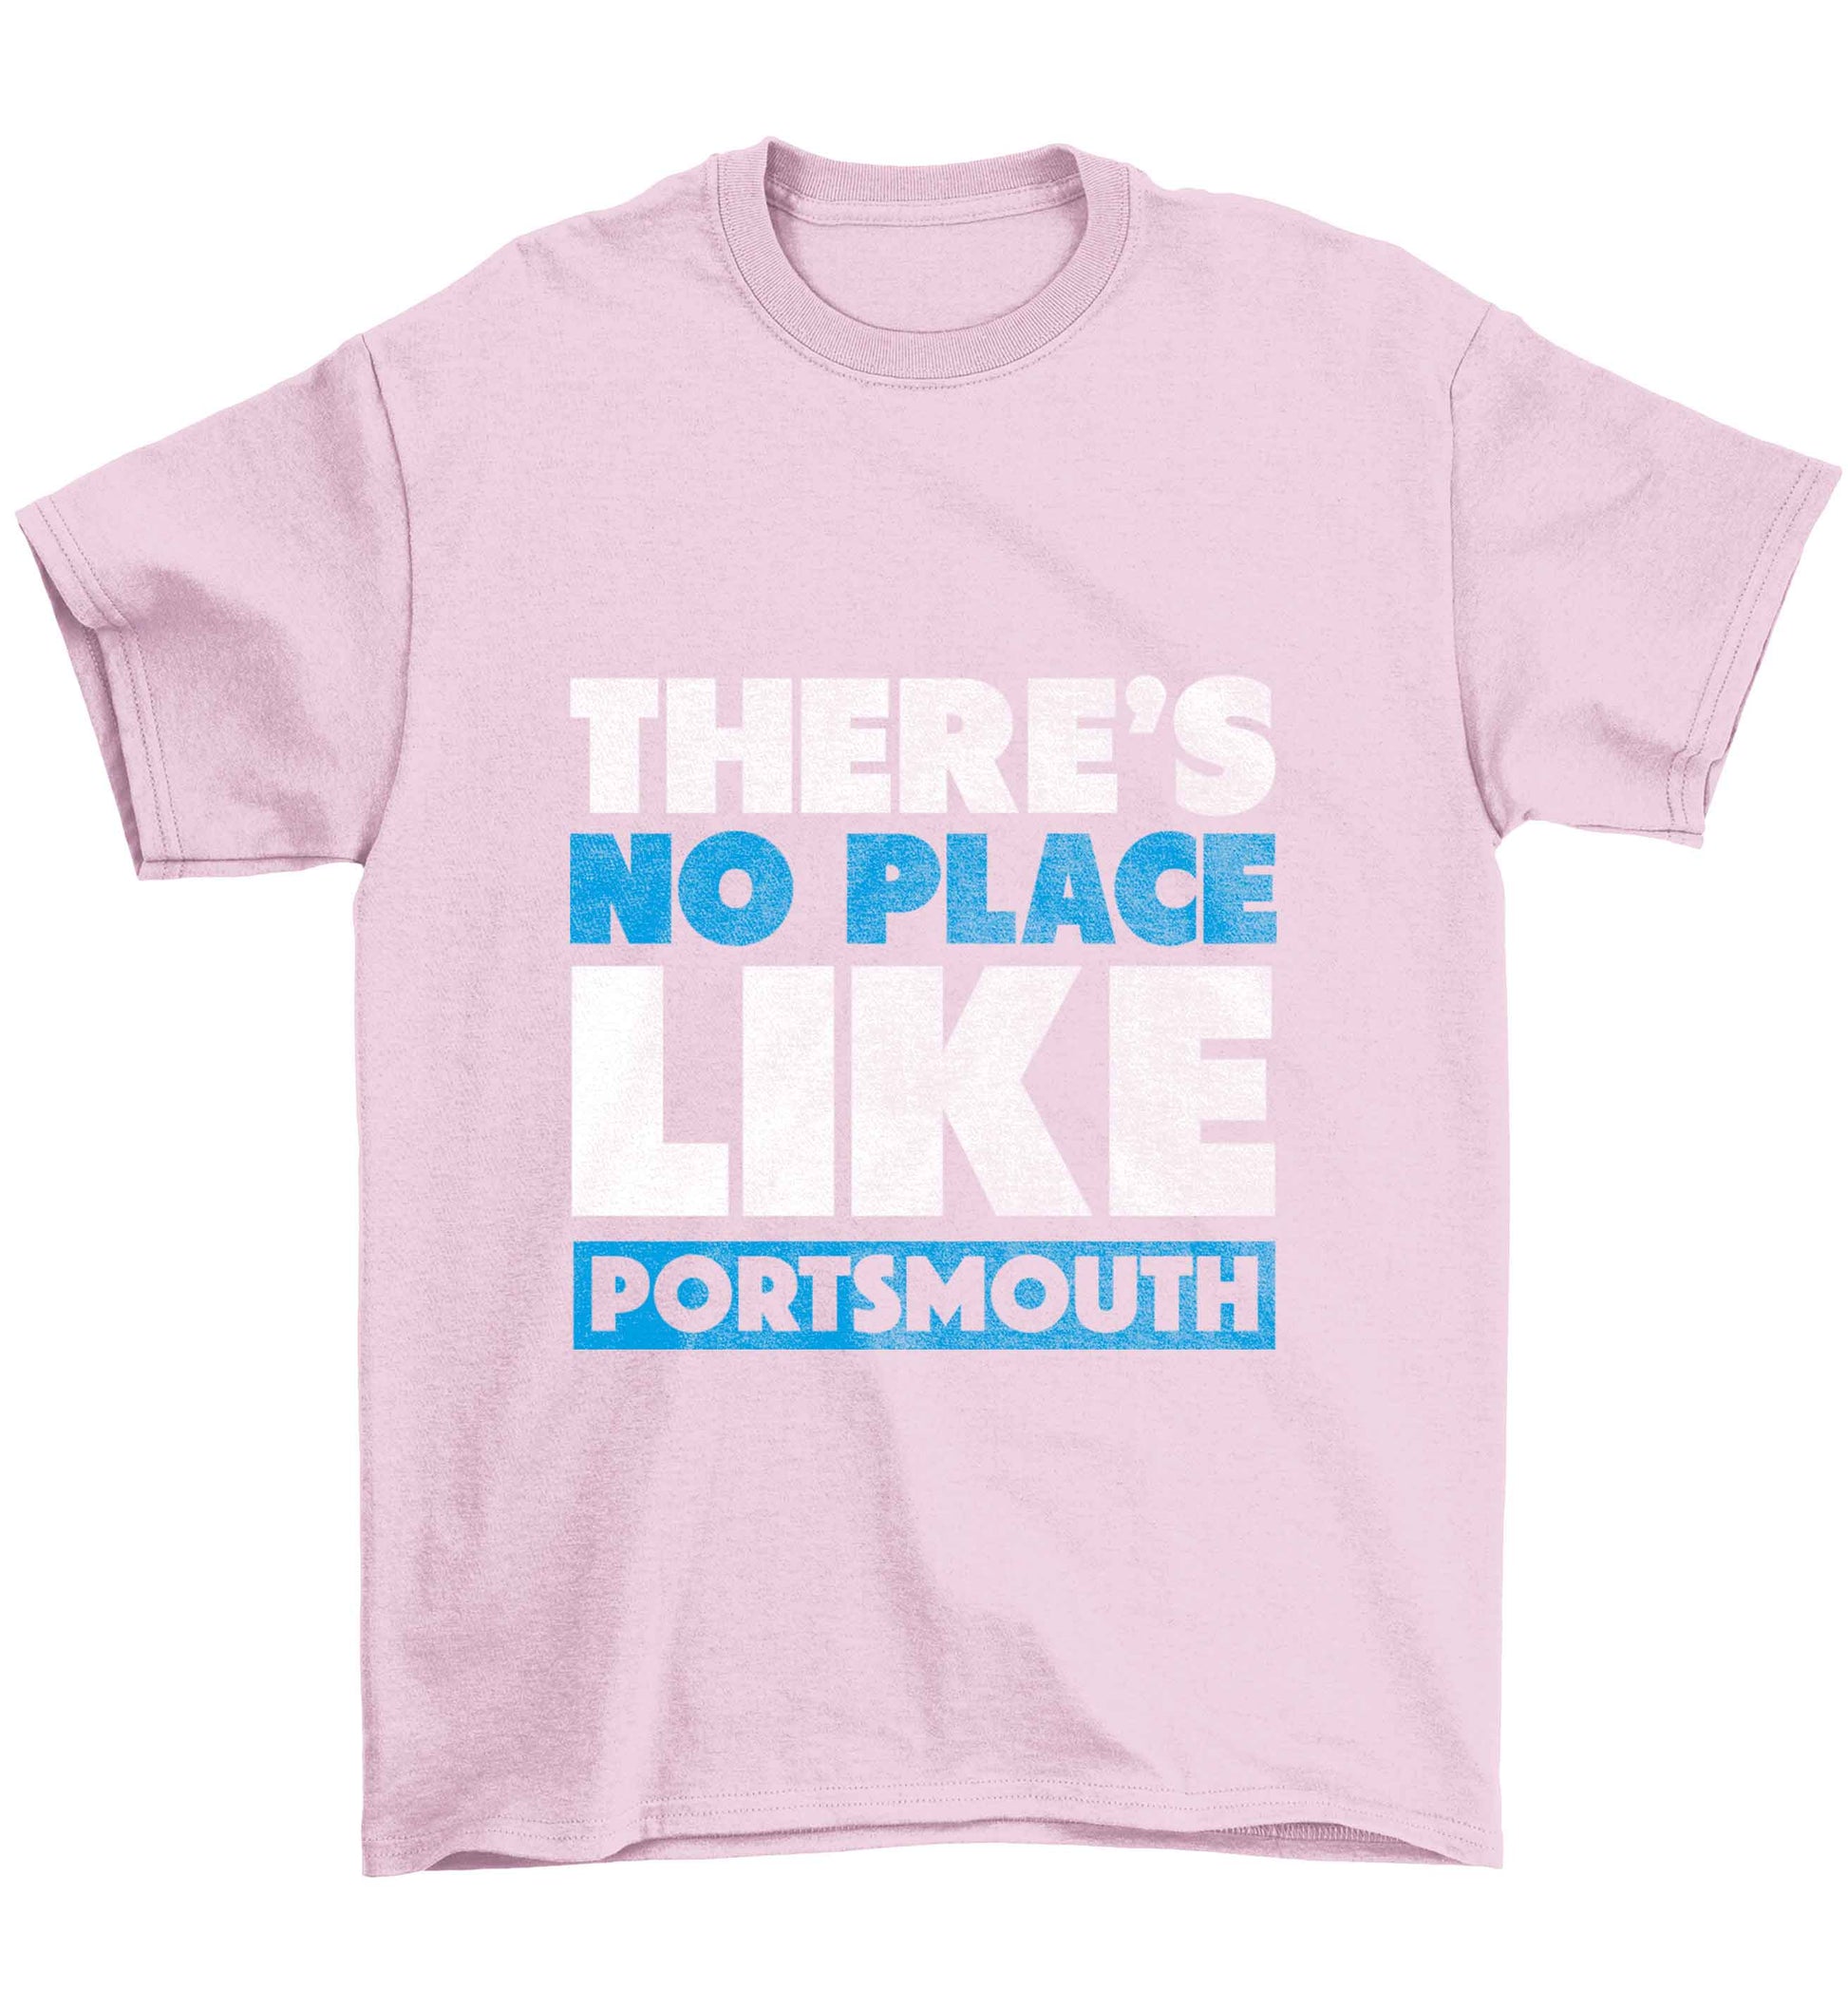 There's no place like Porstmouth Children's light pink Tshirt 12-13 Years